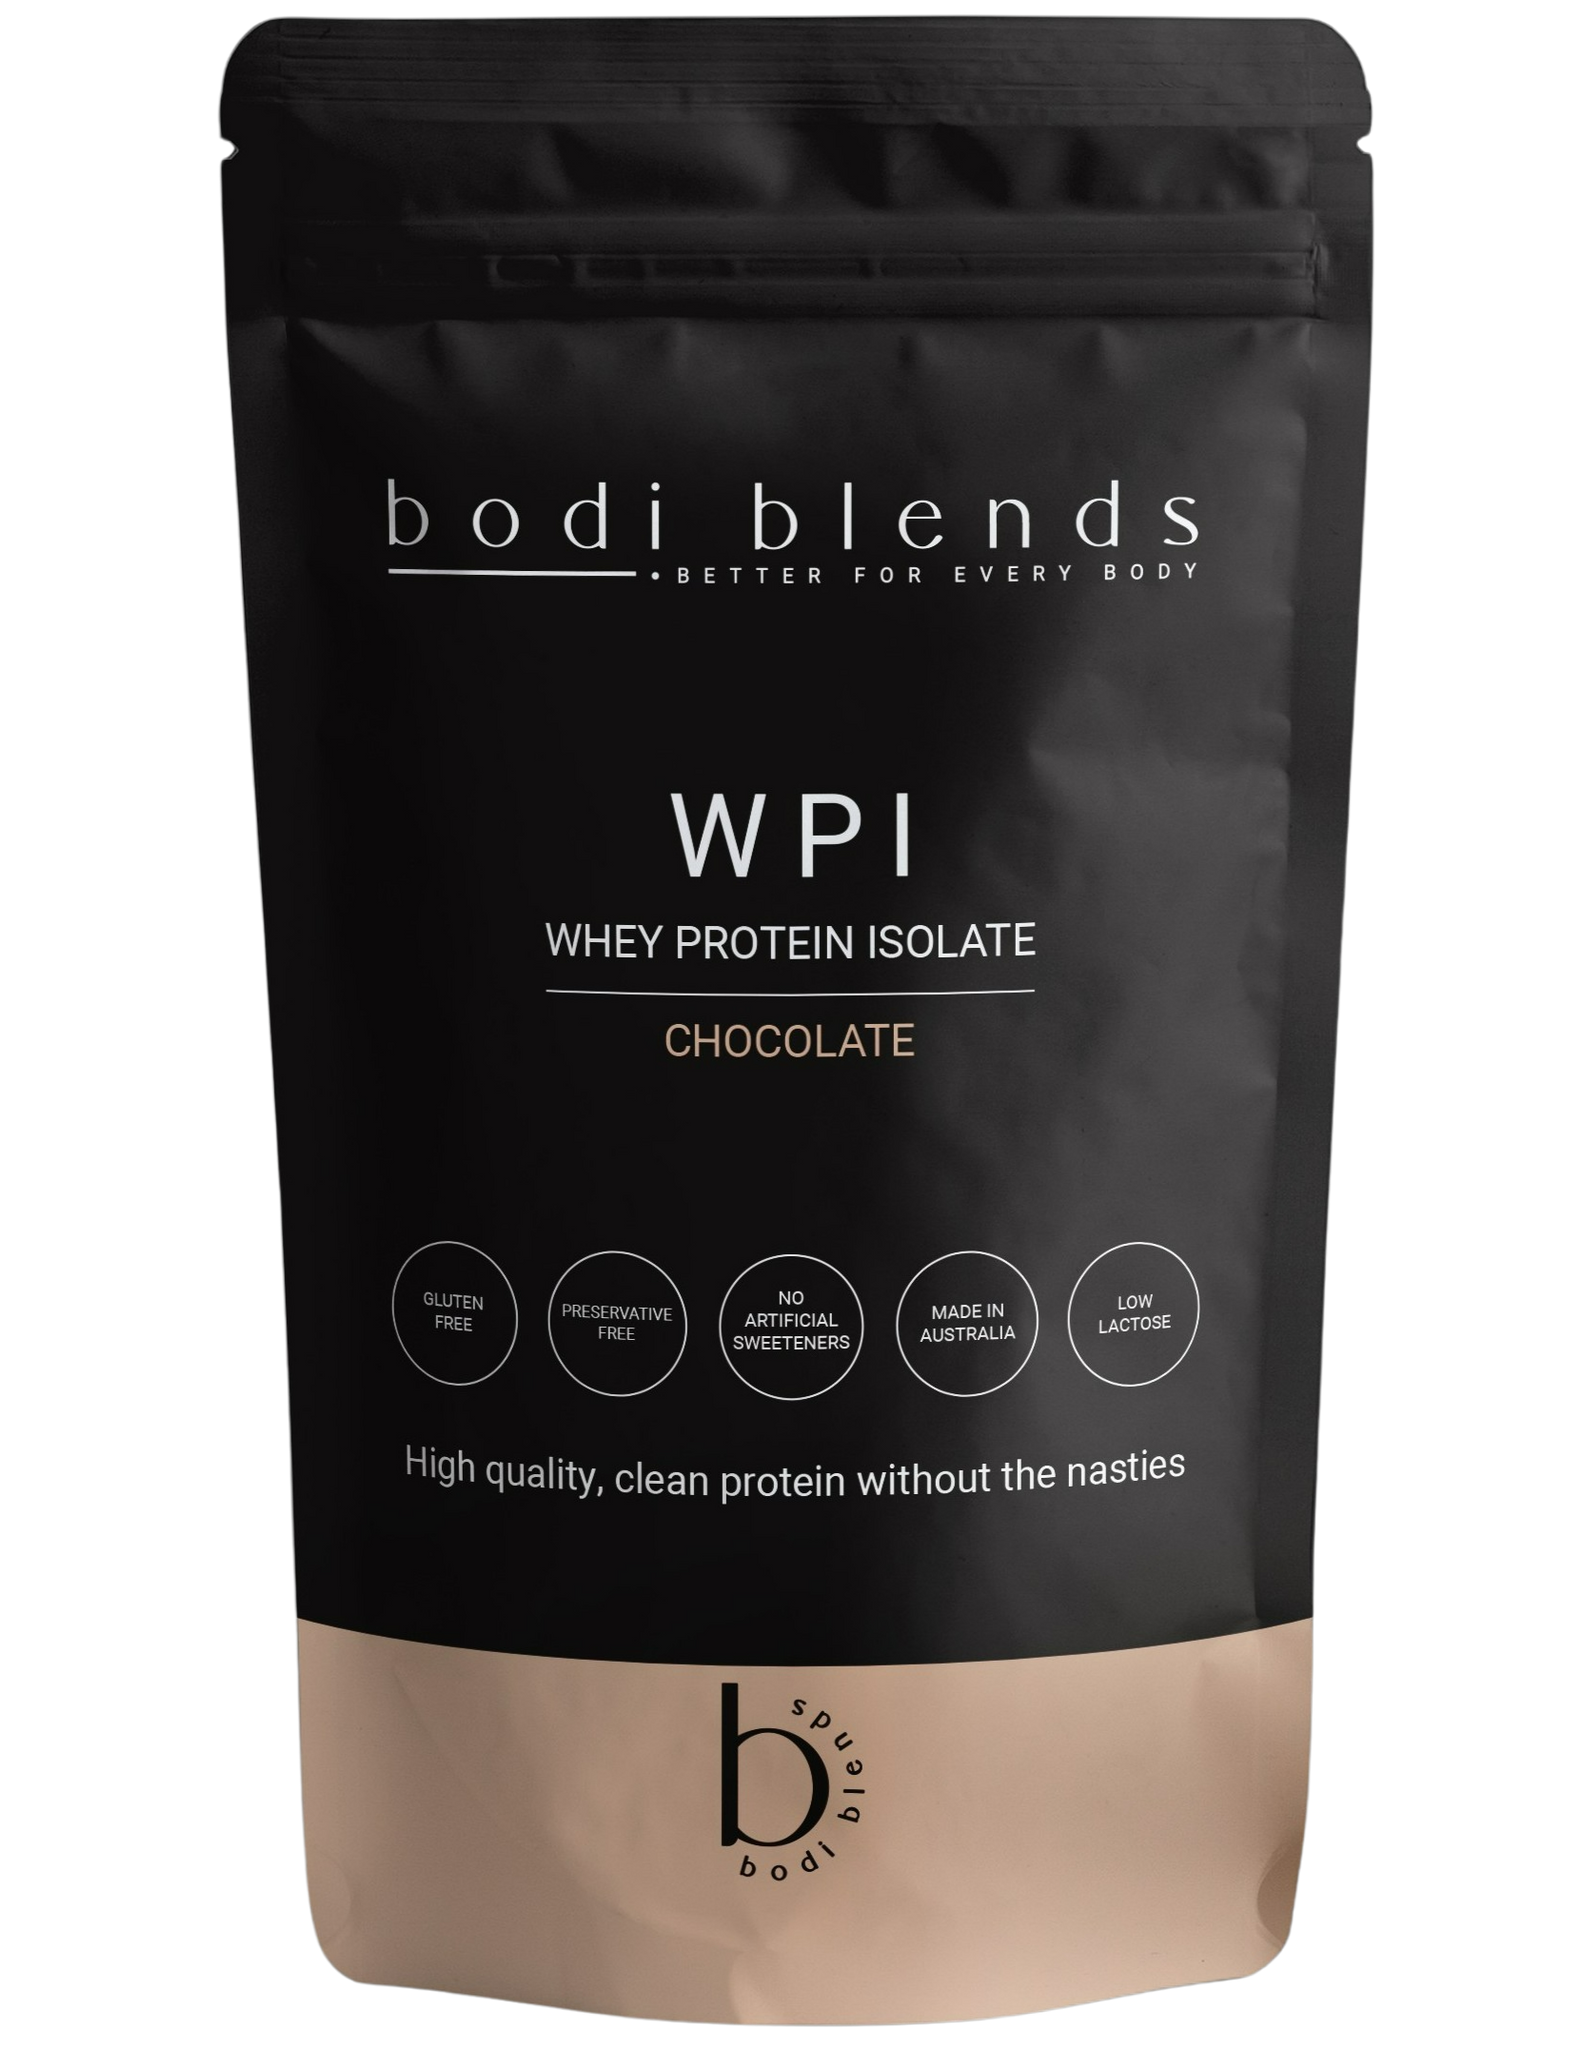 Front of a stand up pouch of chocolate flavoured whey protein isolate powder. The label shows the brand name, product name, size and some nutritional information. The powder is in a resealable, black plastic stand up pouch with a brown strip along the bottom.